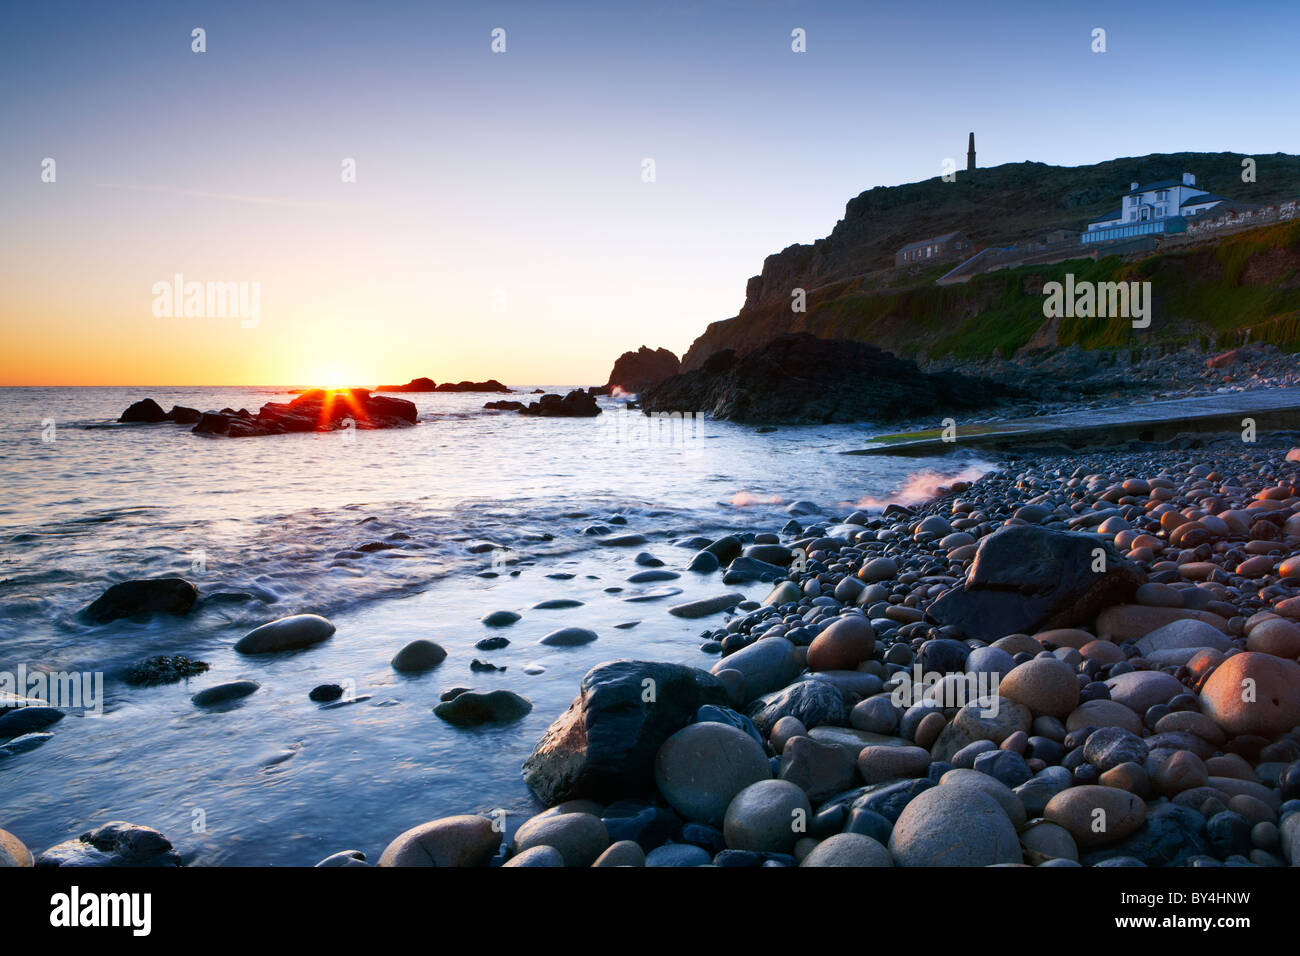 A clear evening sky and the last rays of sunlight highlight the small rocky beach at Priest's Cove Cape Cornwall Stock Photo